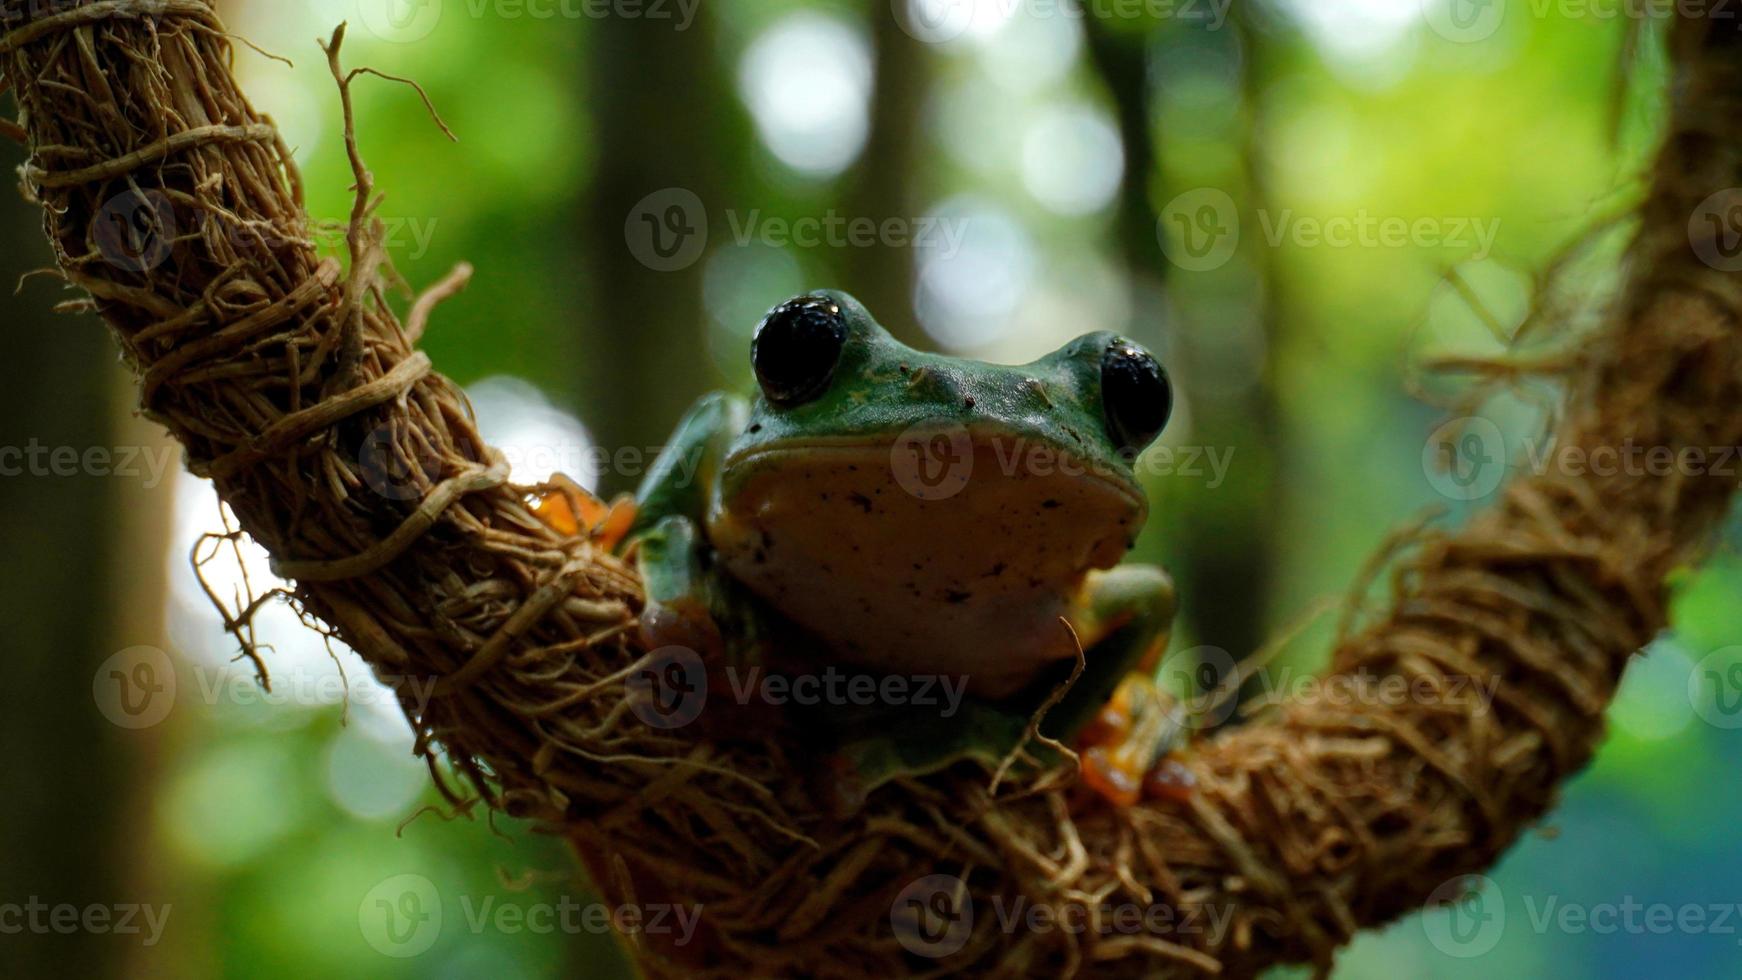 the frog sits on the tree roots photo